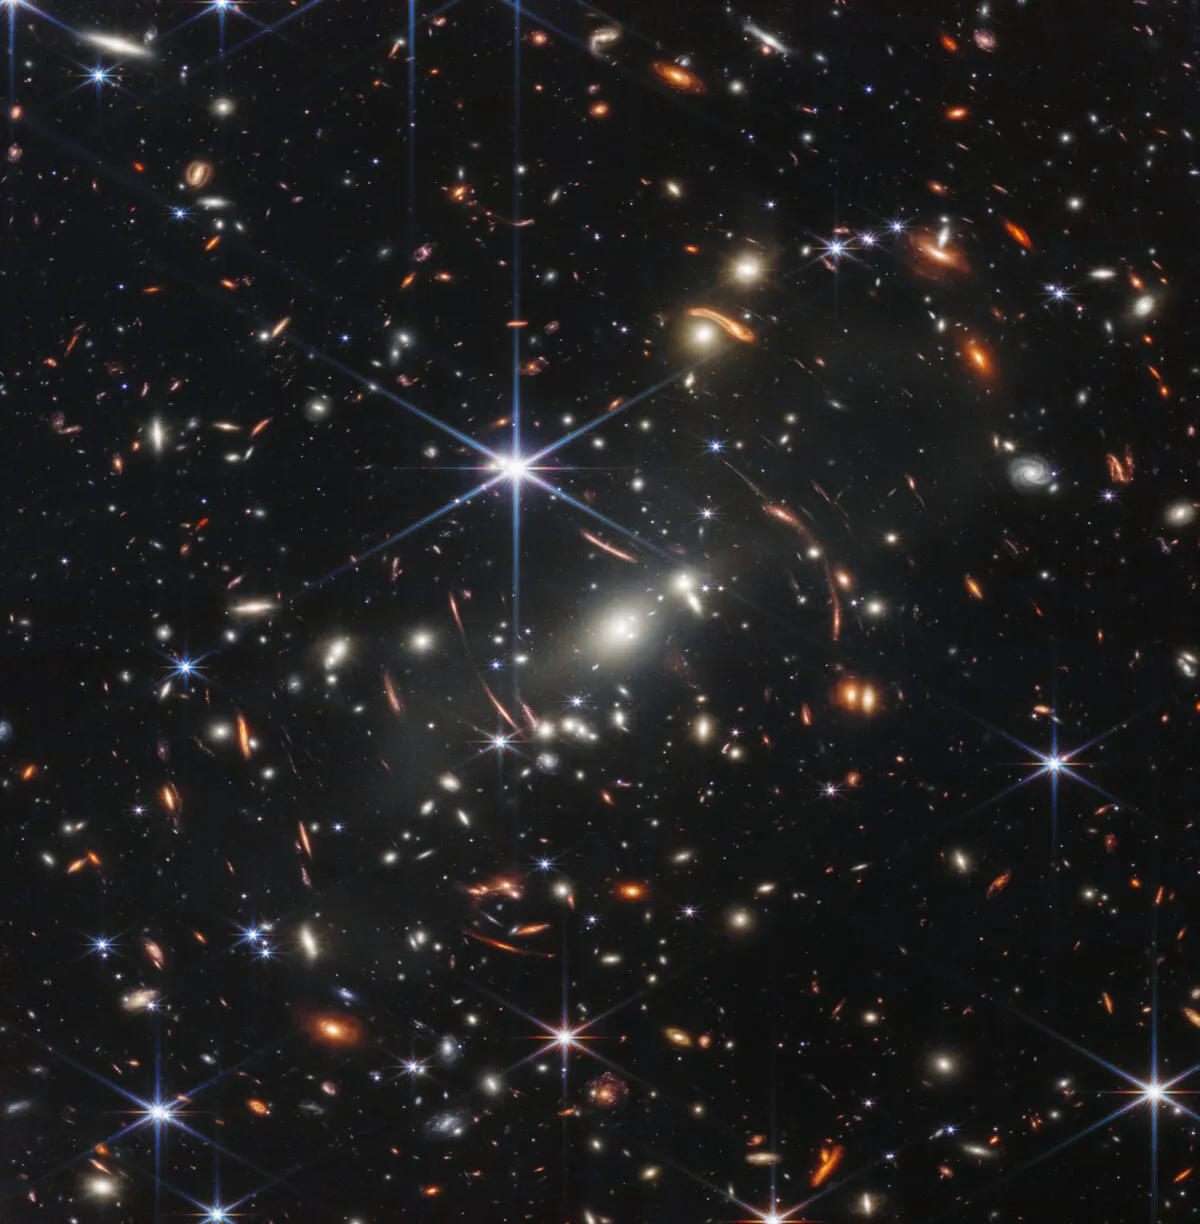 James Webb Space Telescope's first full colour image: a deep view of space centred around galaxy cluster SMACS 0723. Credit: NASA, ESA, CSA, and STScI